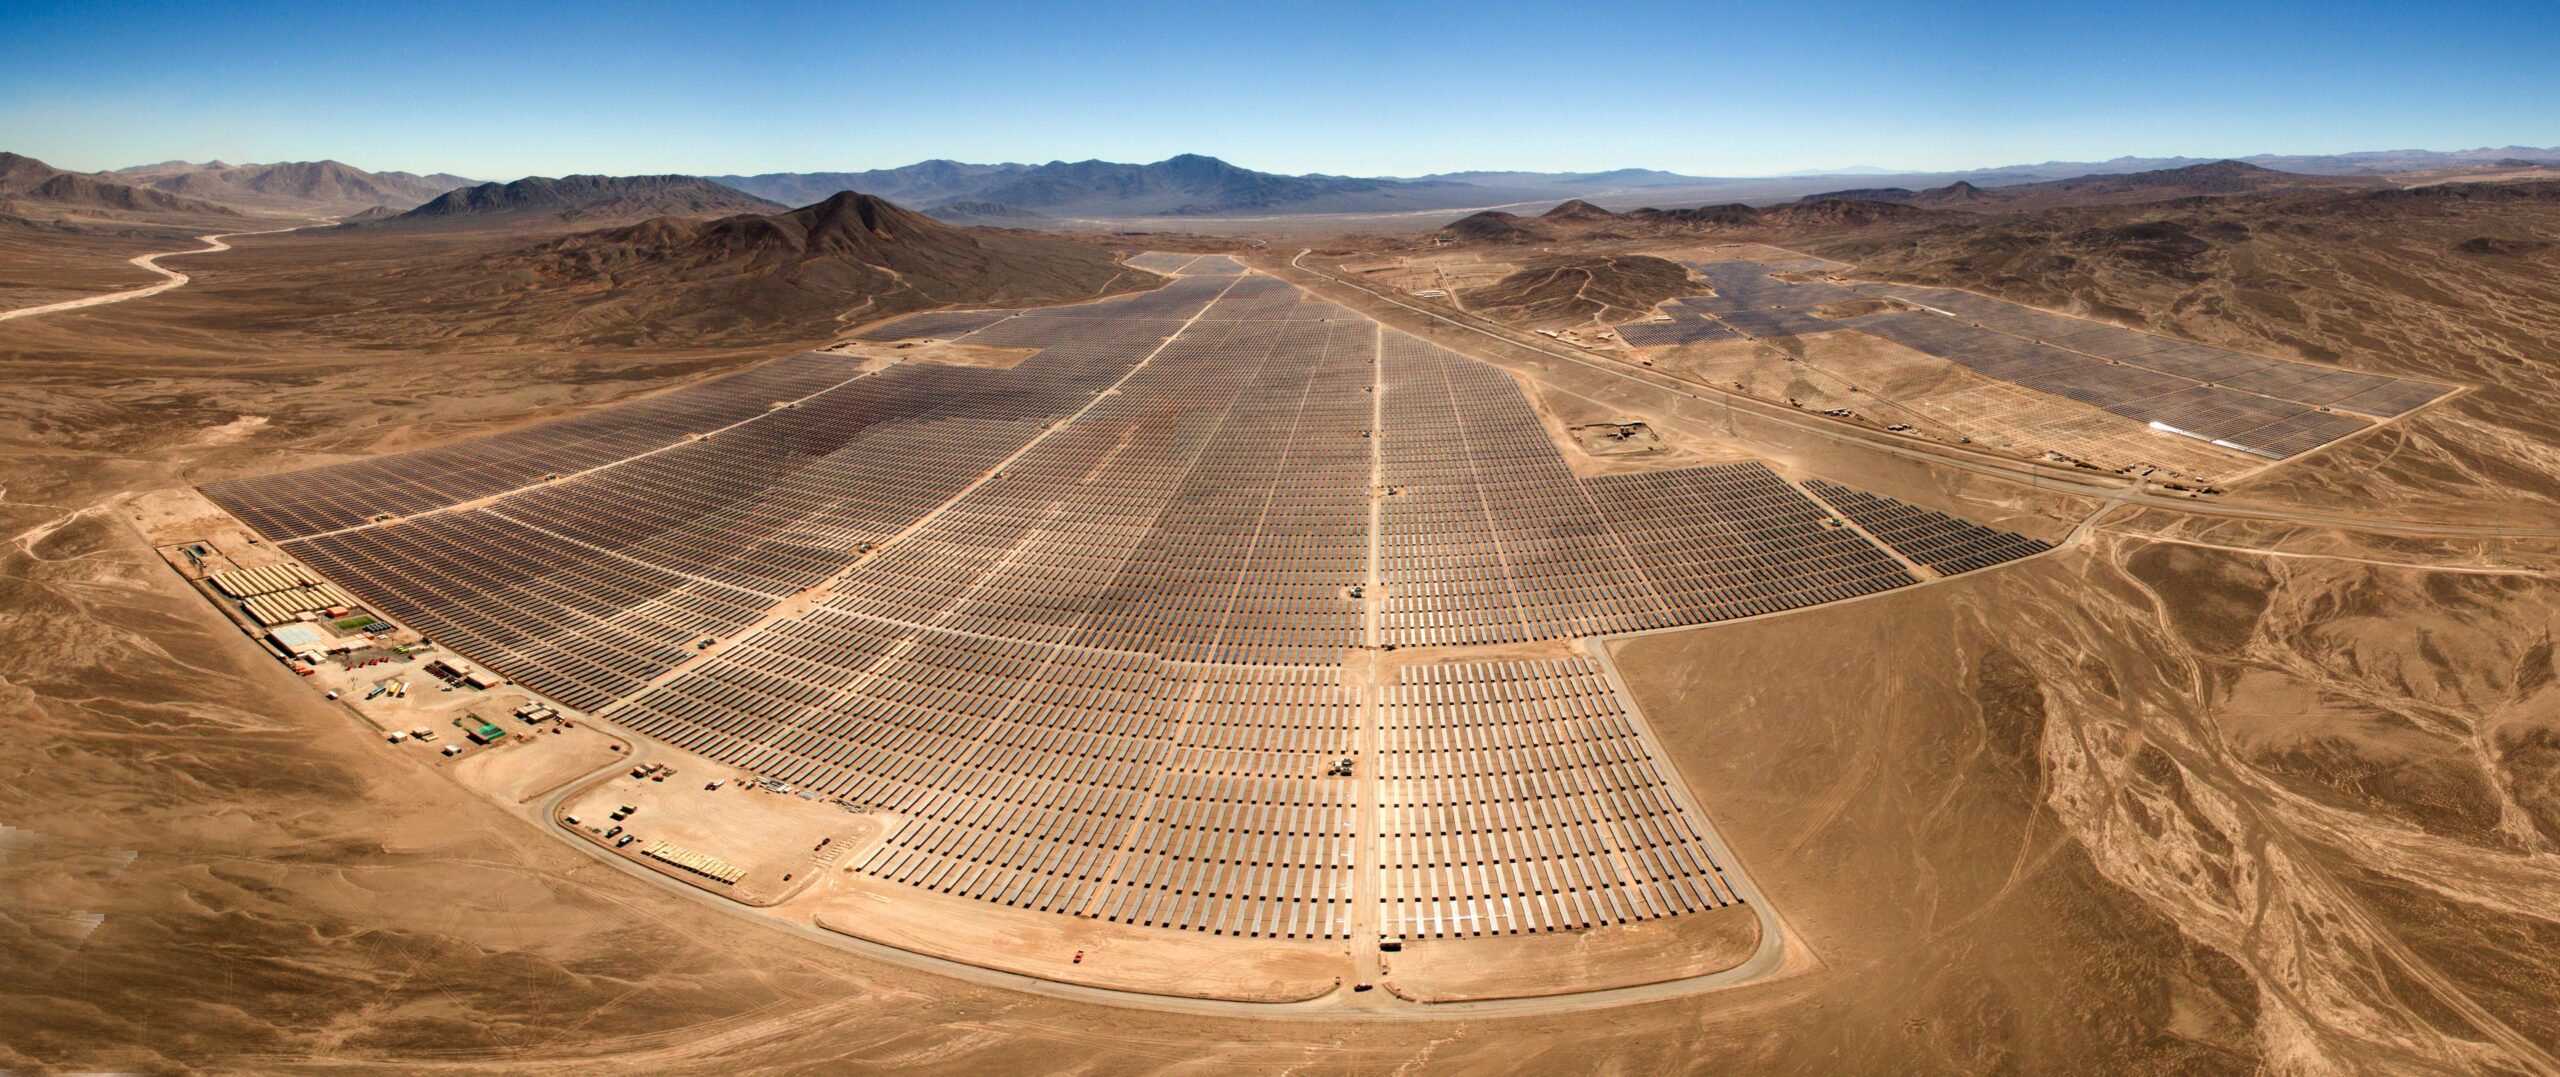 Huge solar park in a desert landscape in view from above